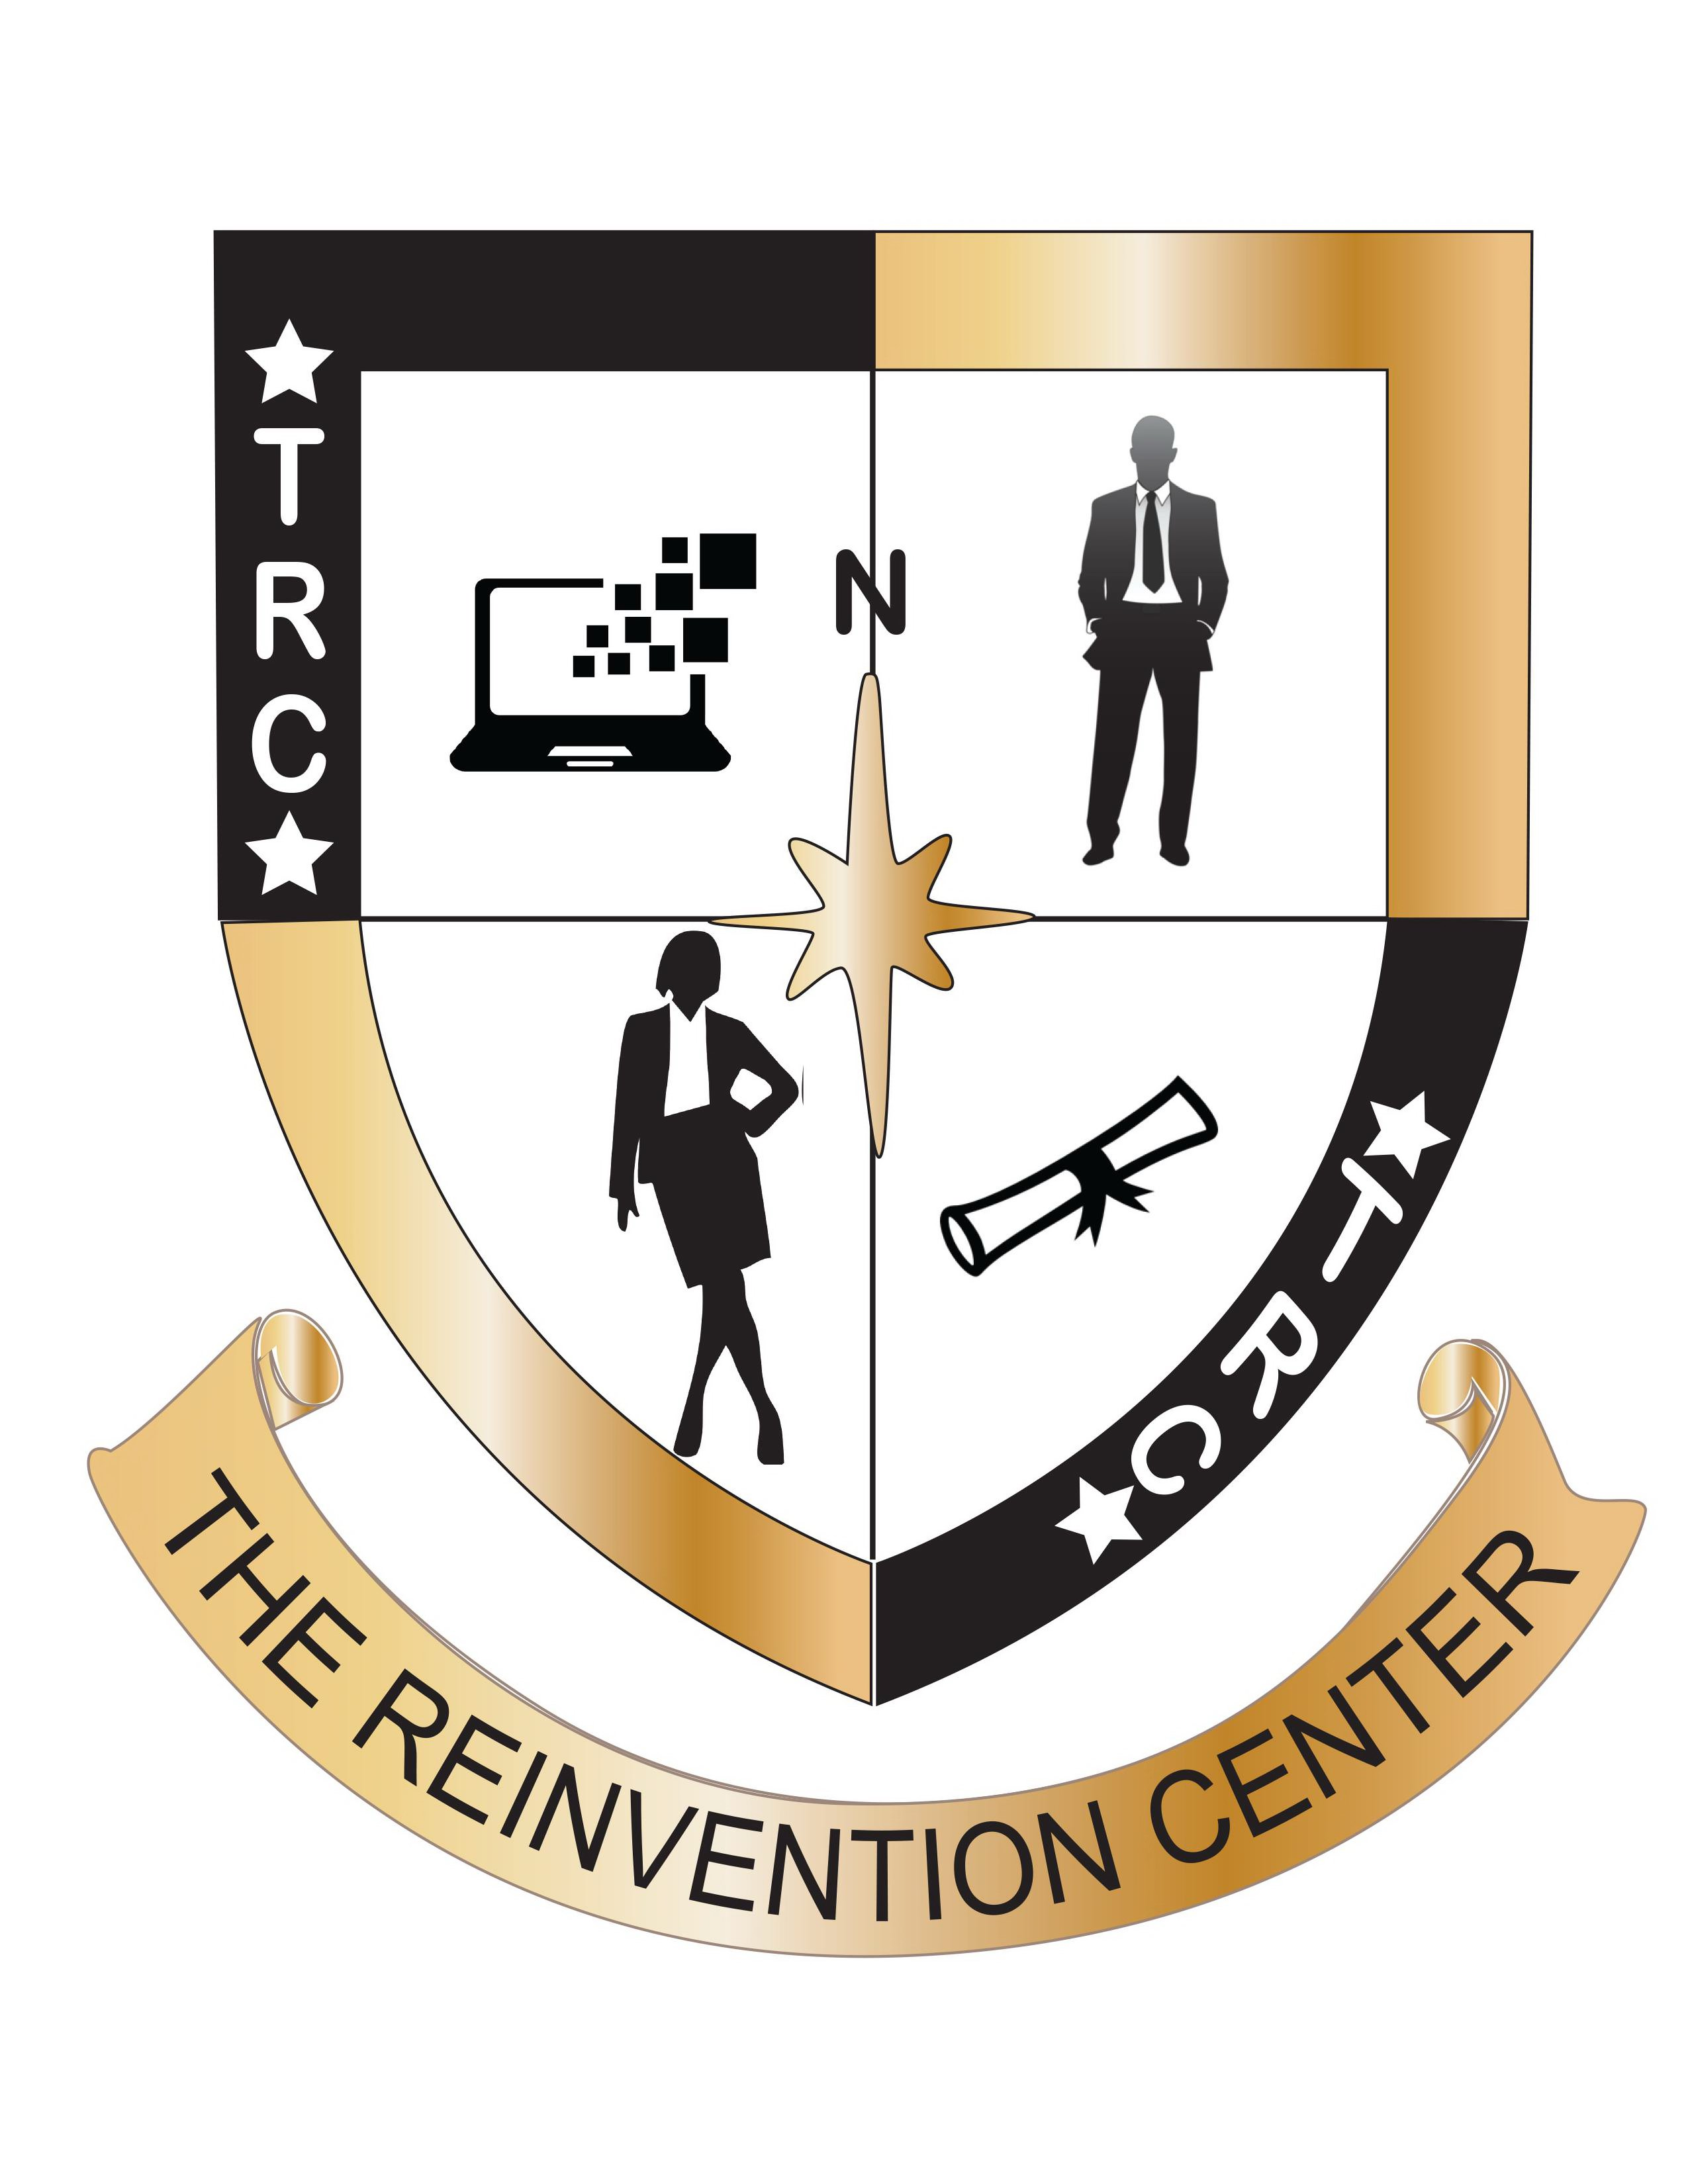  TRC, AND THE REINVENTION CENTER